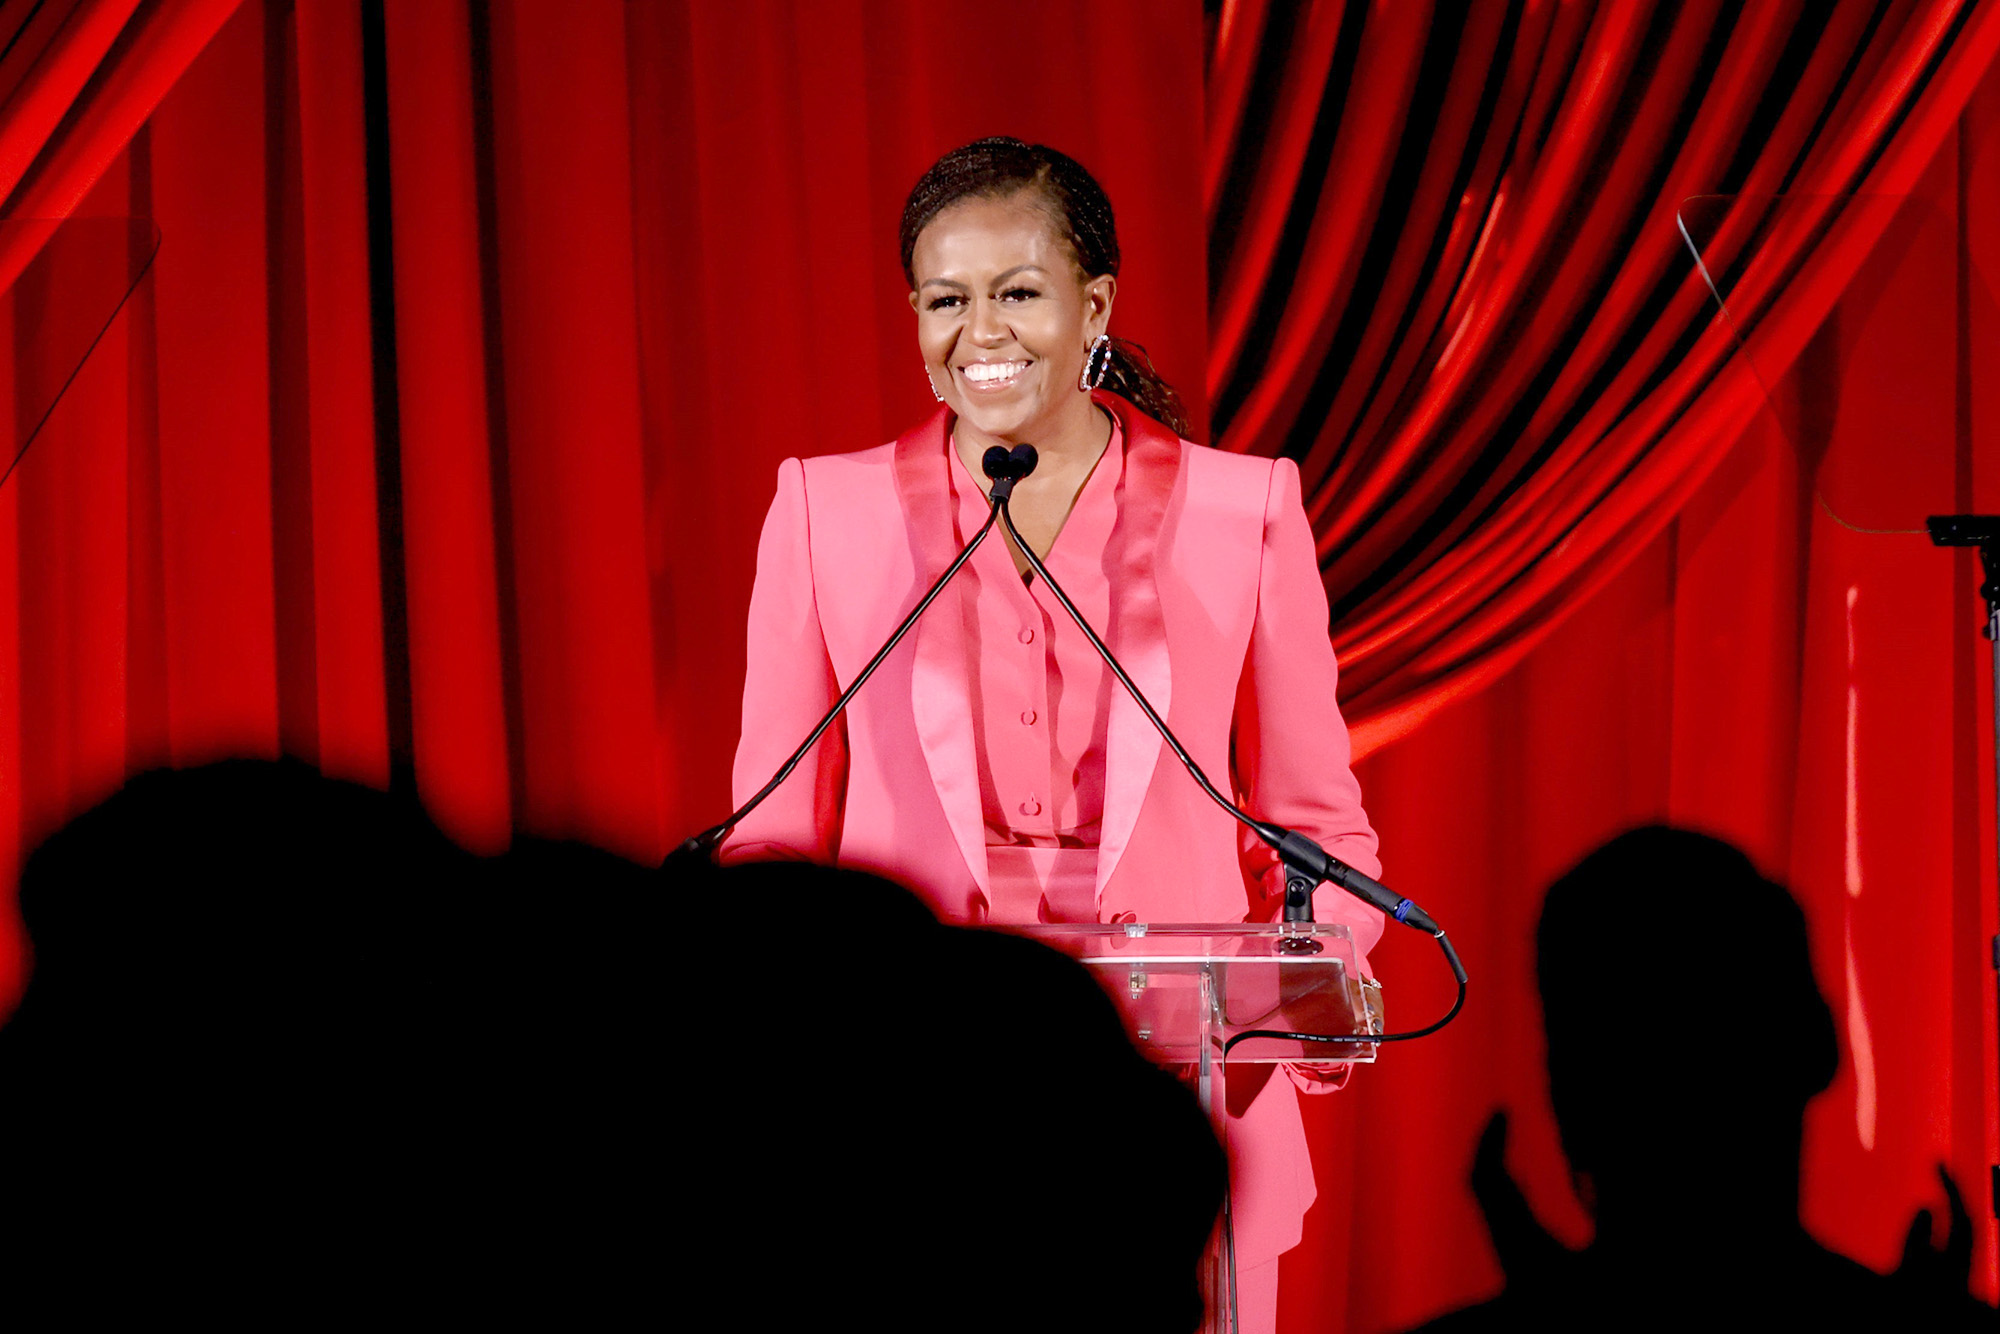 PHOTO: Former First Lady Michelle Obama speaks onstage at the Clooney Foundation For Justice Inaugural Albie Awards at New York Public Library in New York, Sept. 29, 2022.